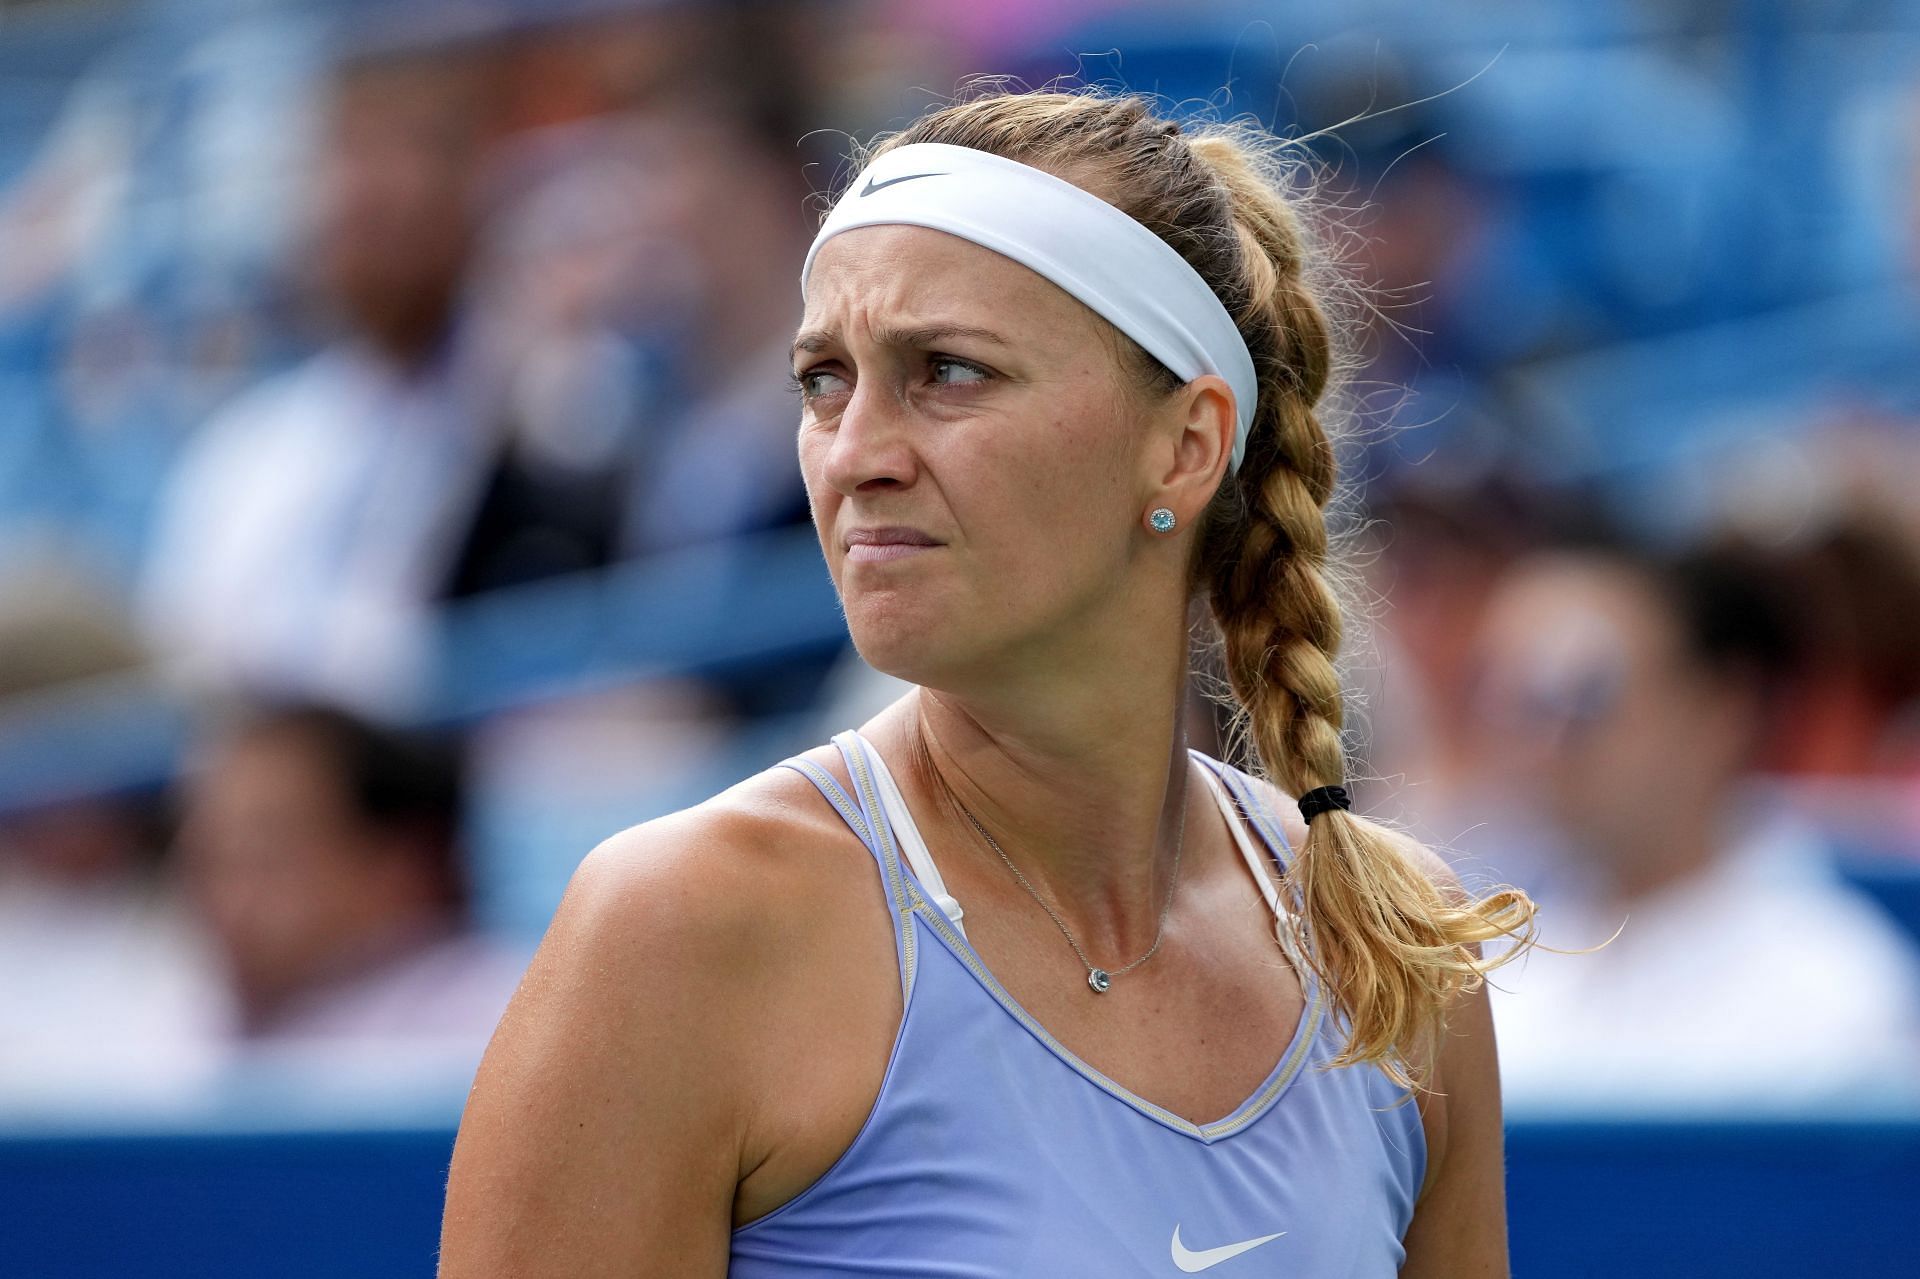 Petra Kvitova finished as the runner-up at the 2022 Cincinnati Open